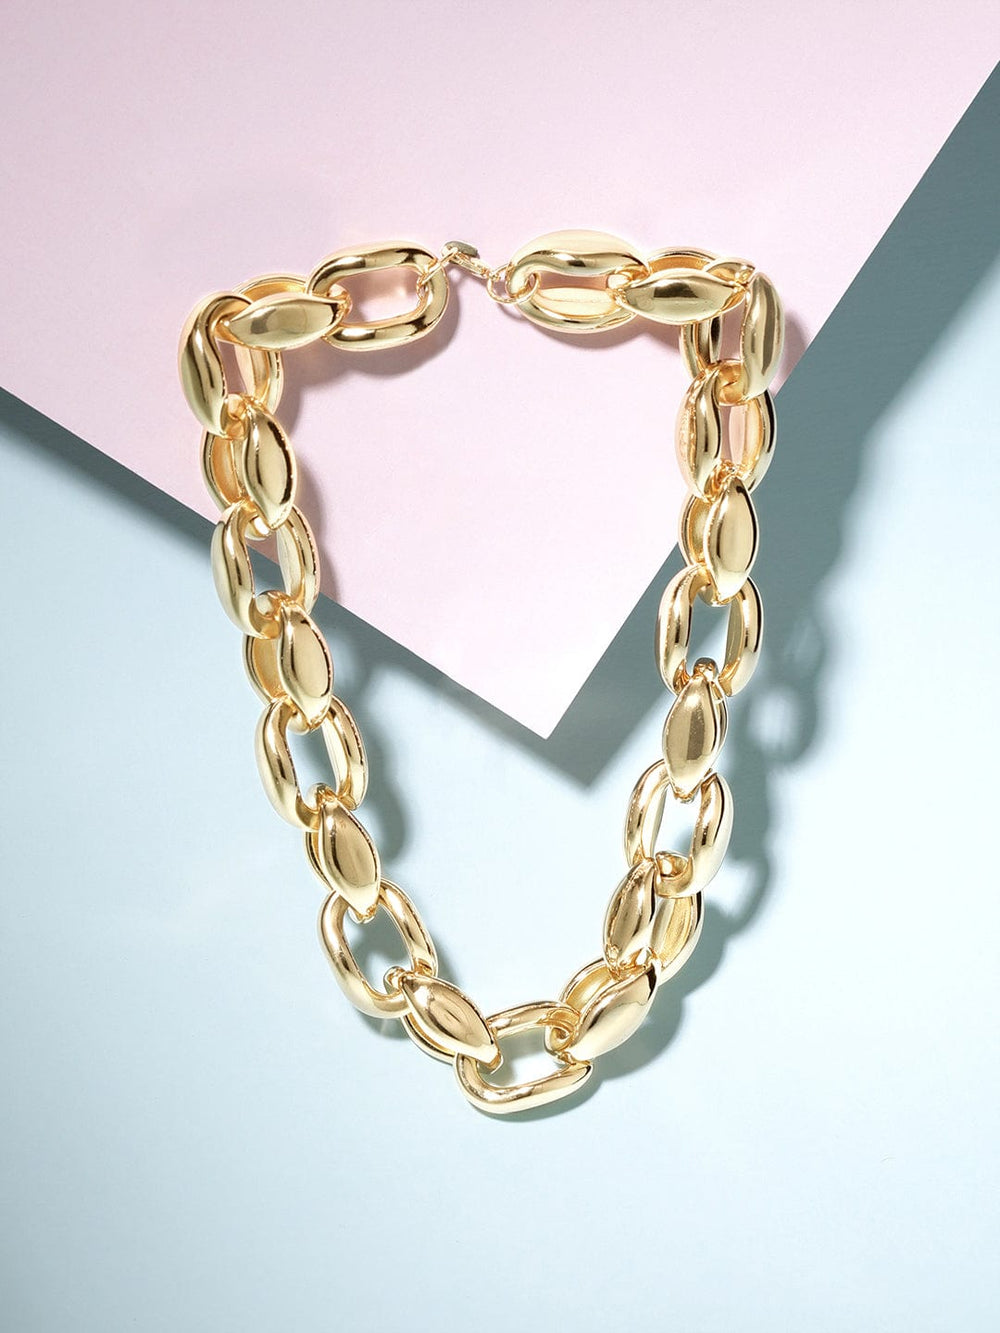 Rubans Voguish 18K Gold Plated Link Chain Choker Necklace Chain & Necklaces